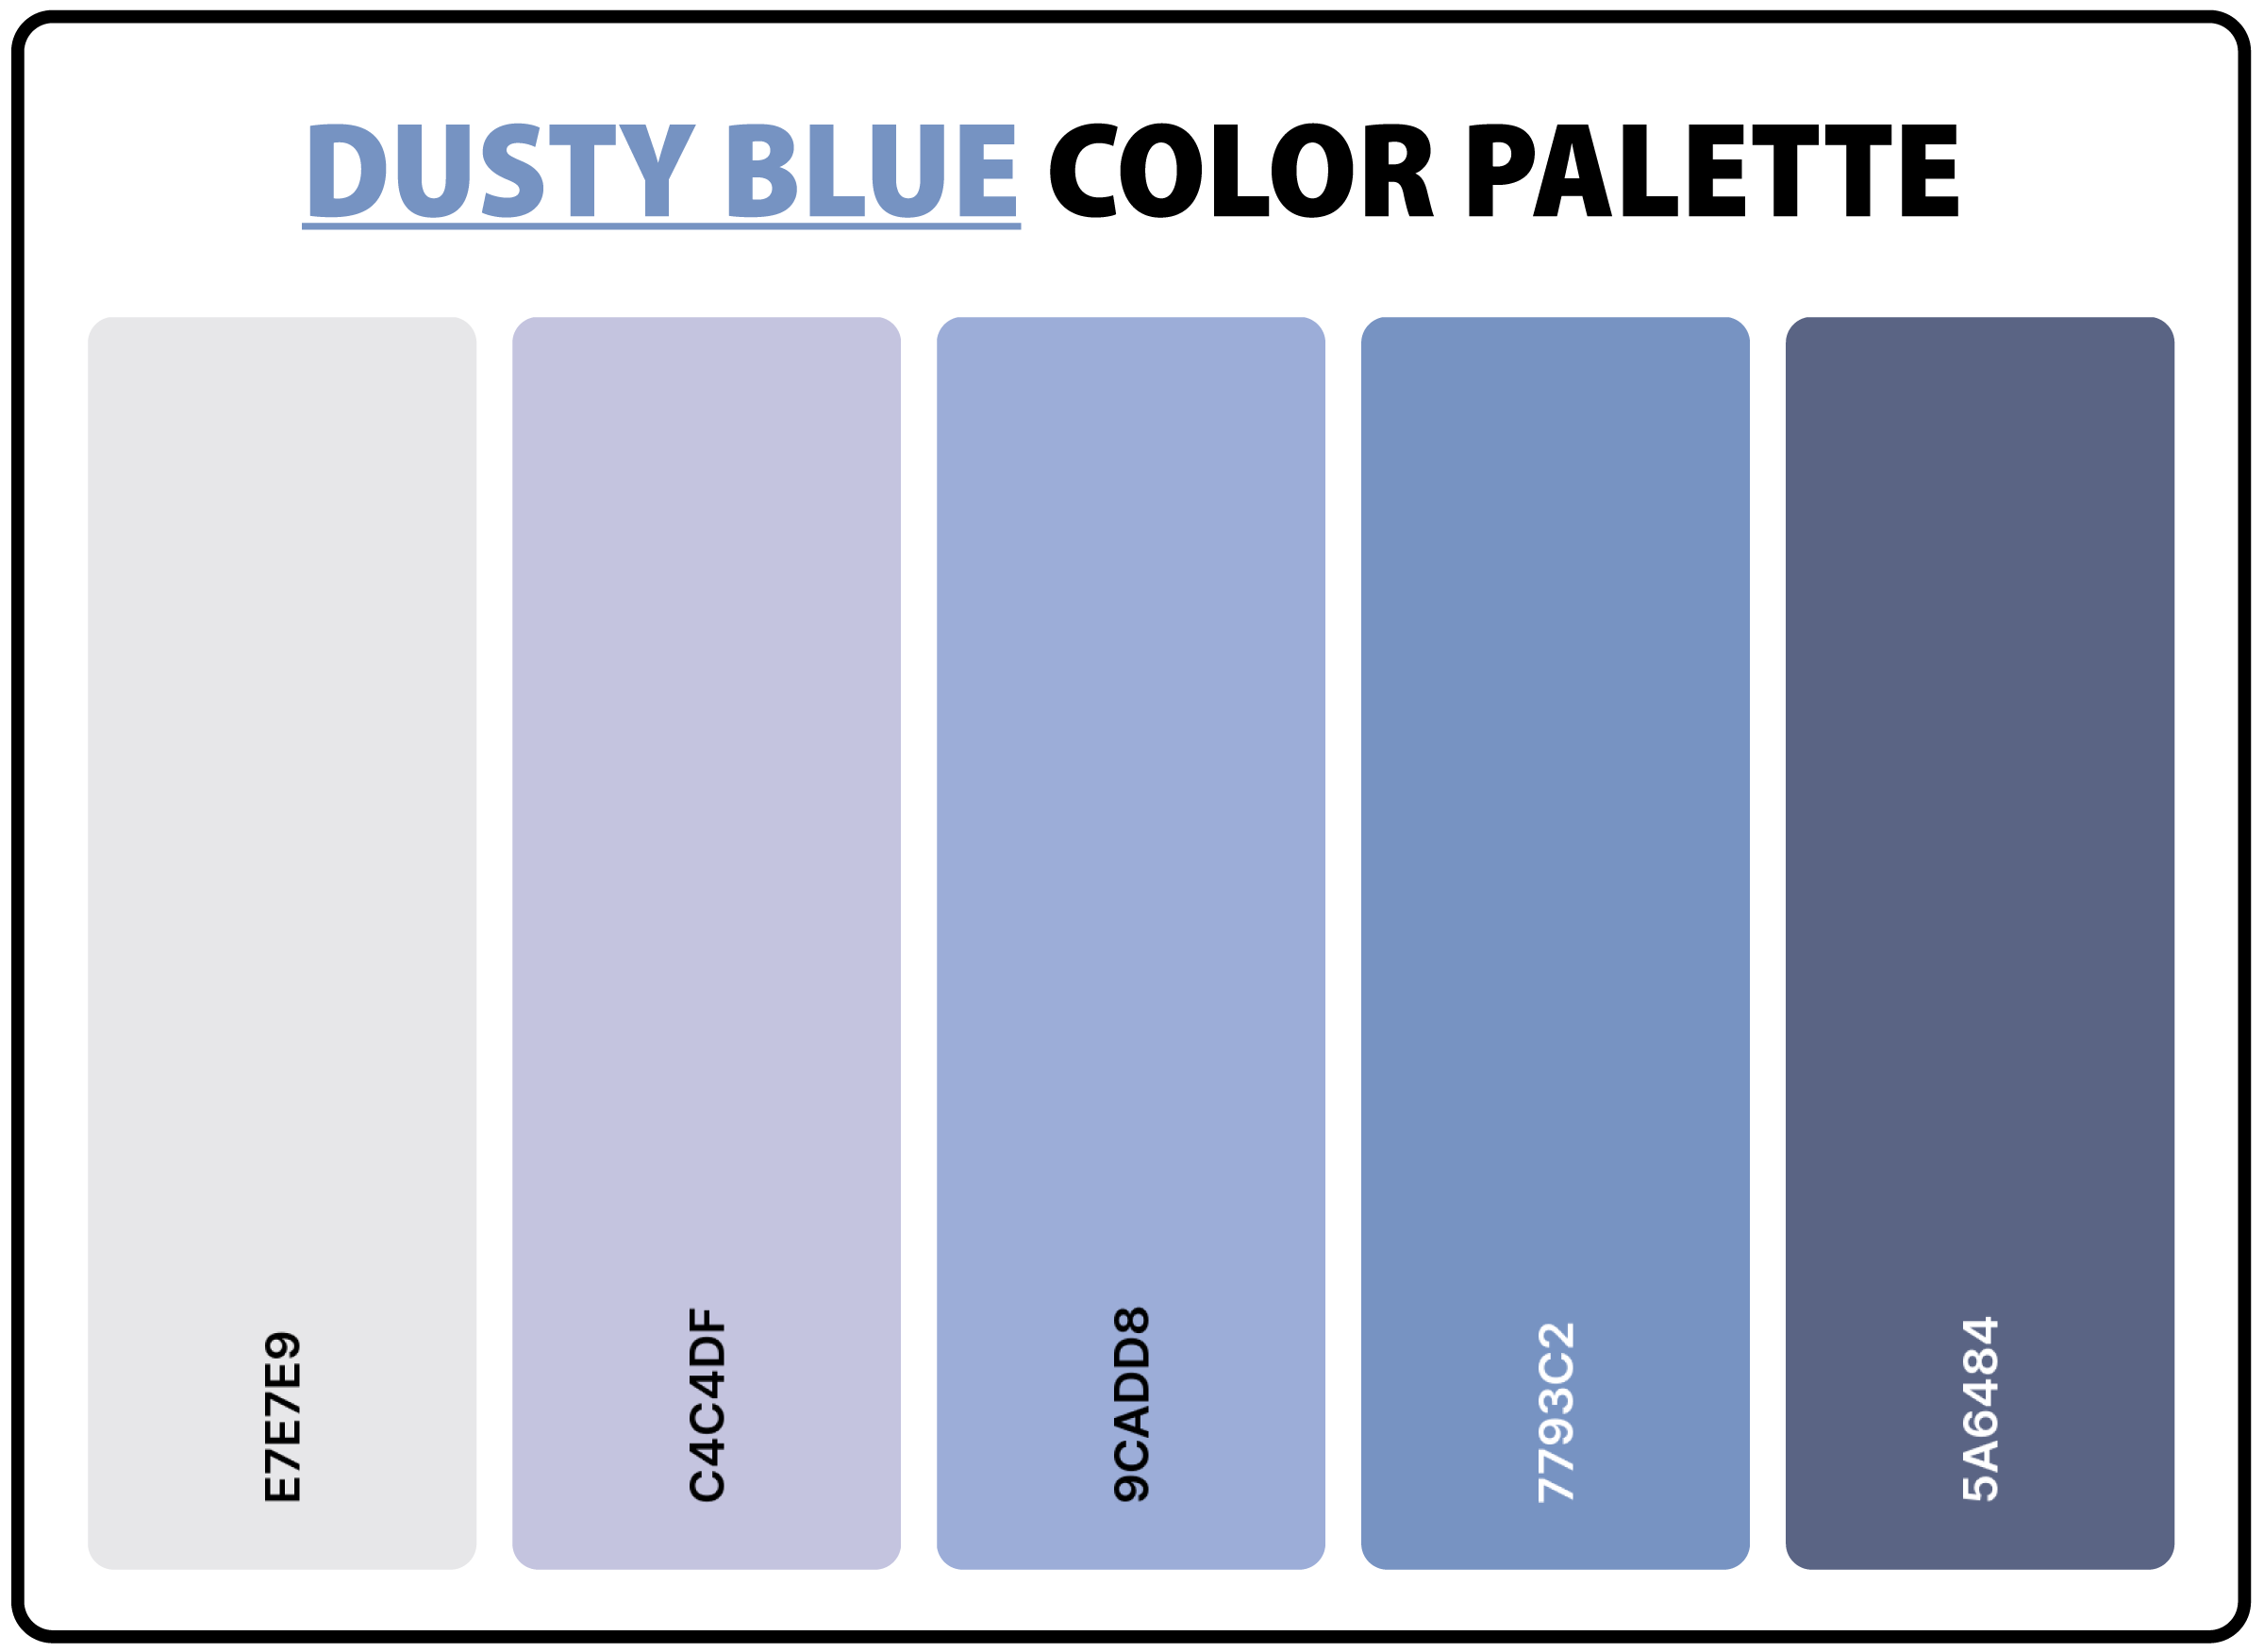 Dusty-Blue-Color-Palette-with-Hex-Codes